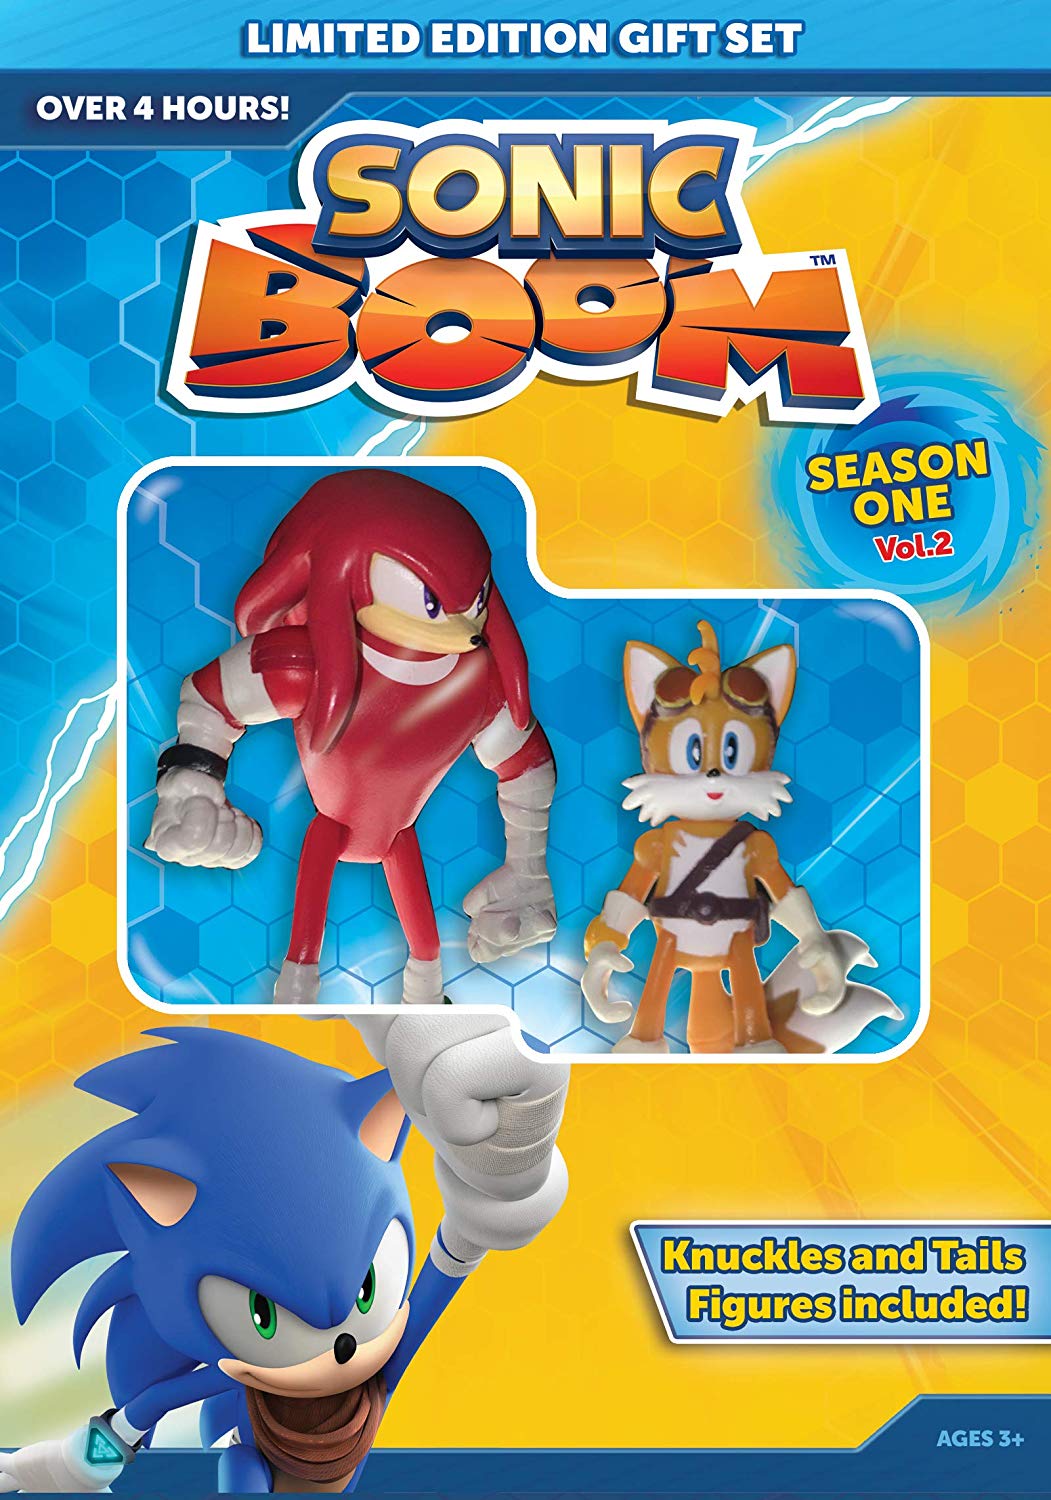 Sonic Boom Season 1, Volume 2 * Nearly Five Hours of Laugh-Out-Loud, Animated Fun